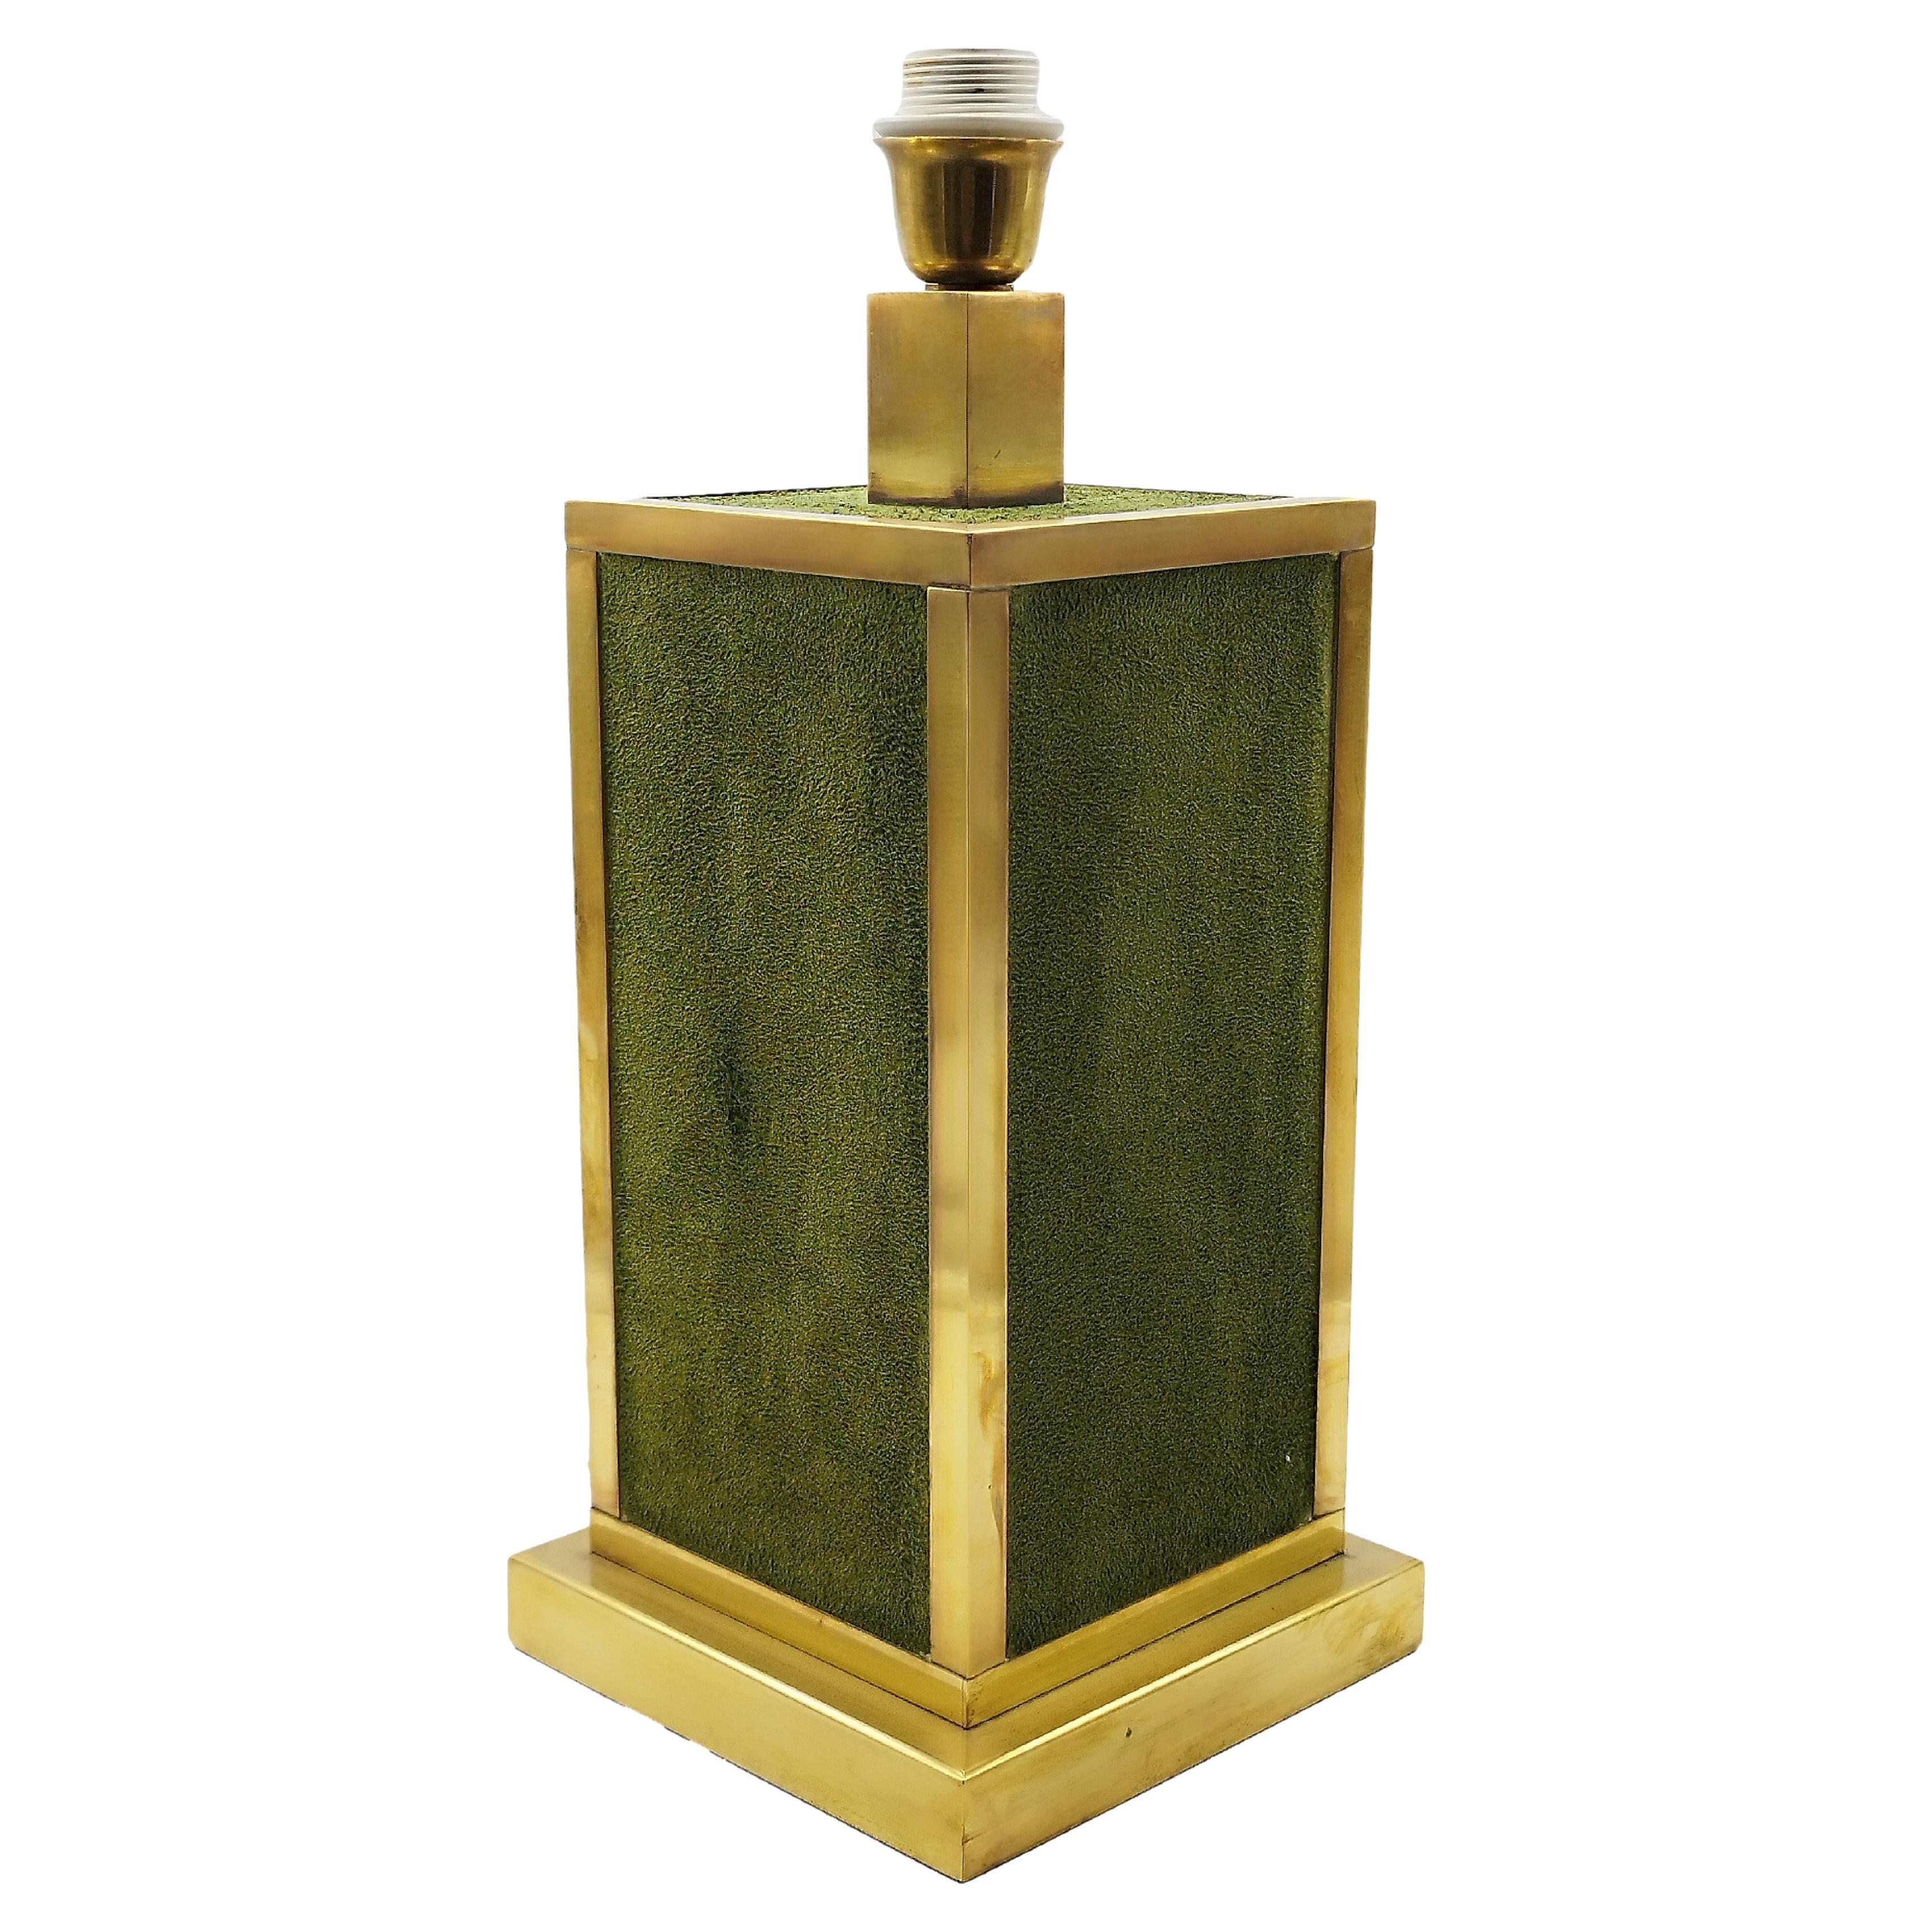 Liwan's Roma Brass and Green Suede Leather Table Lamp, Italy, 1970s For Sale